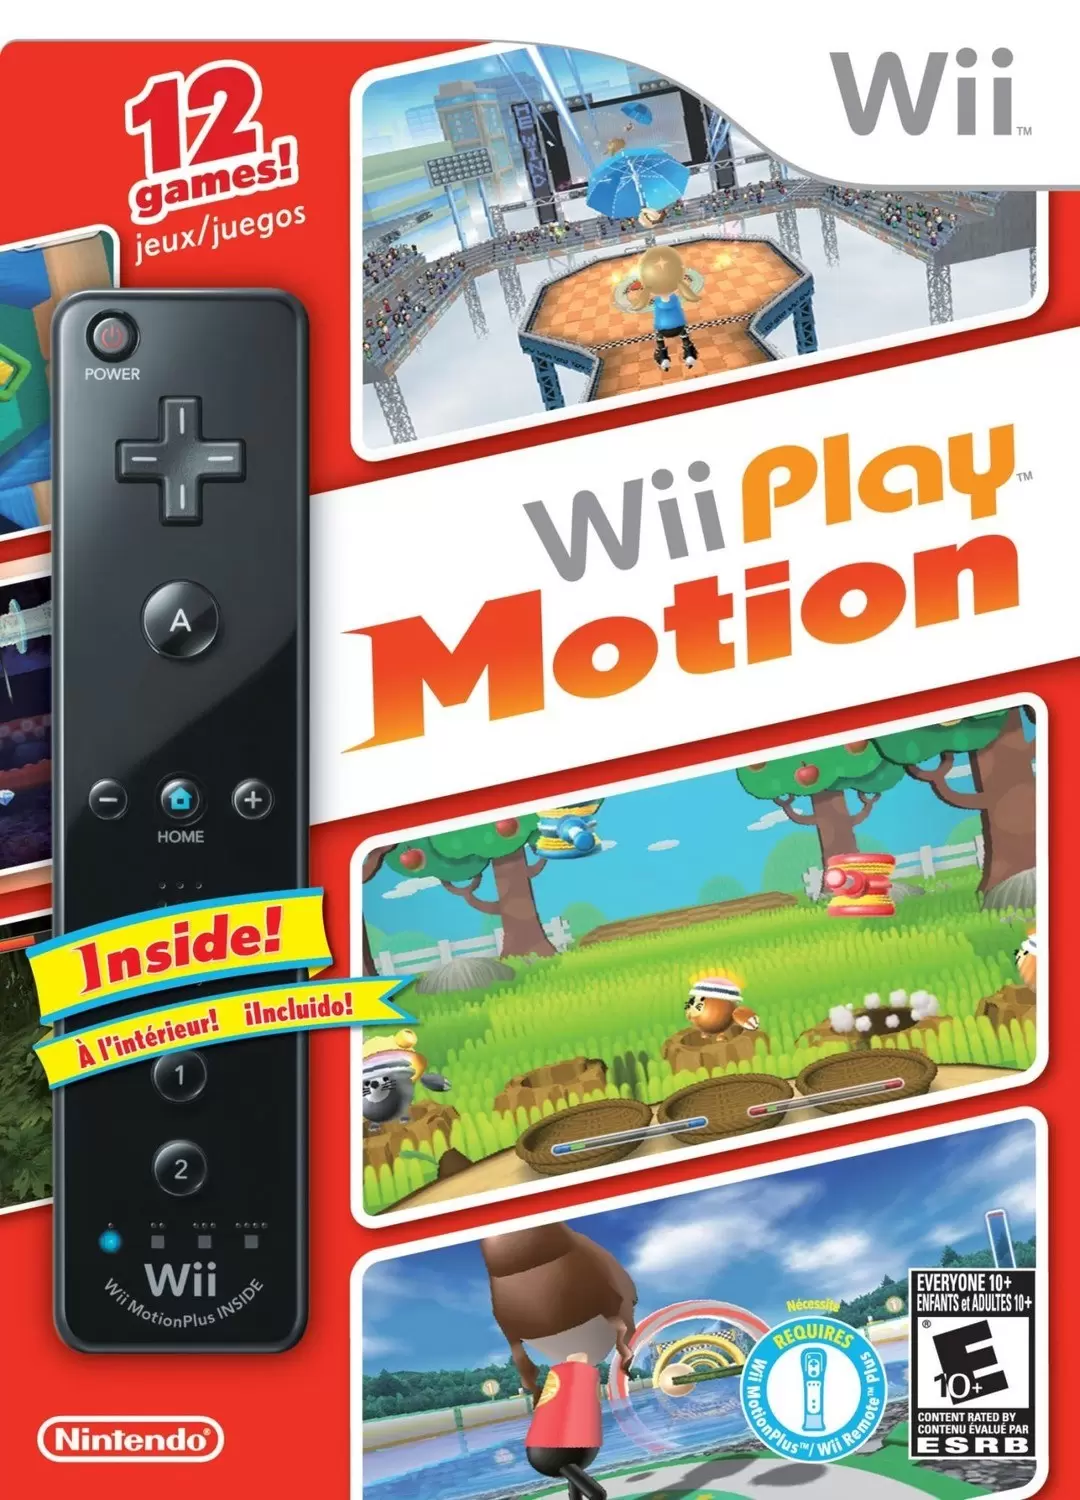 Nintendo Wii Games - Wii Play: Motion